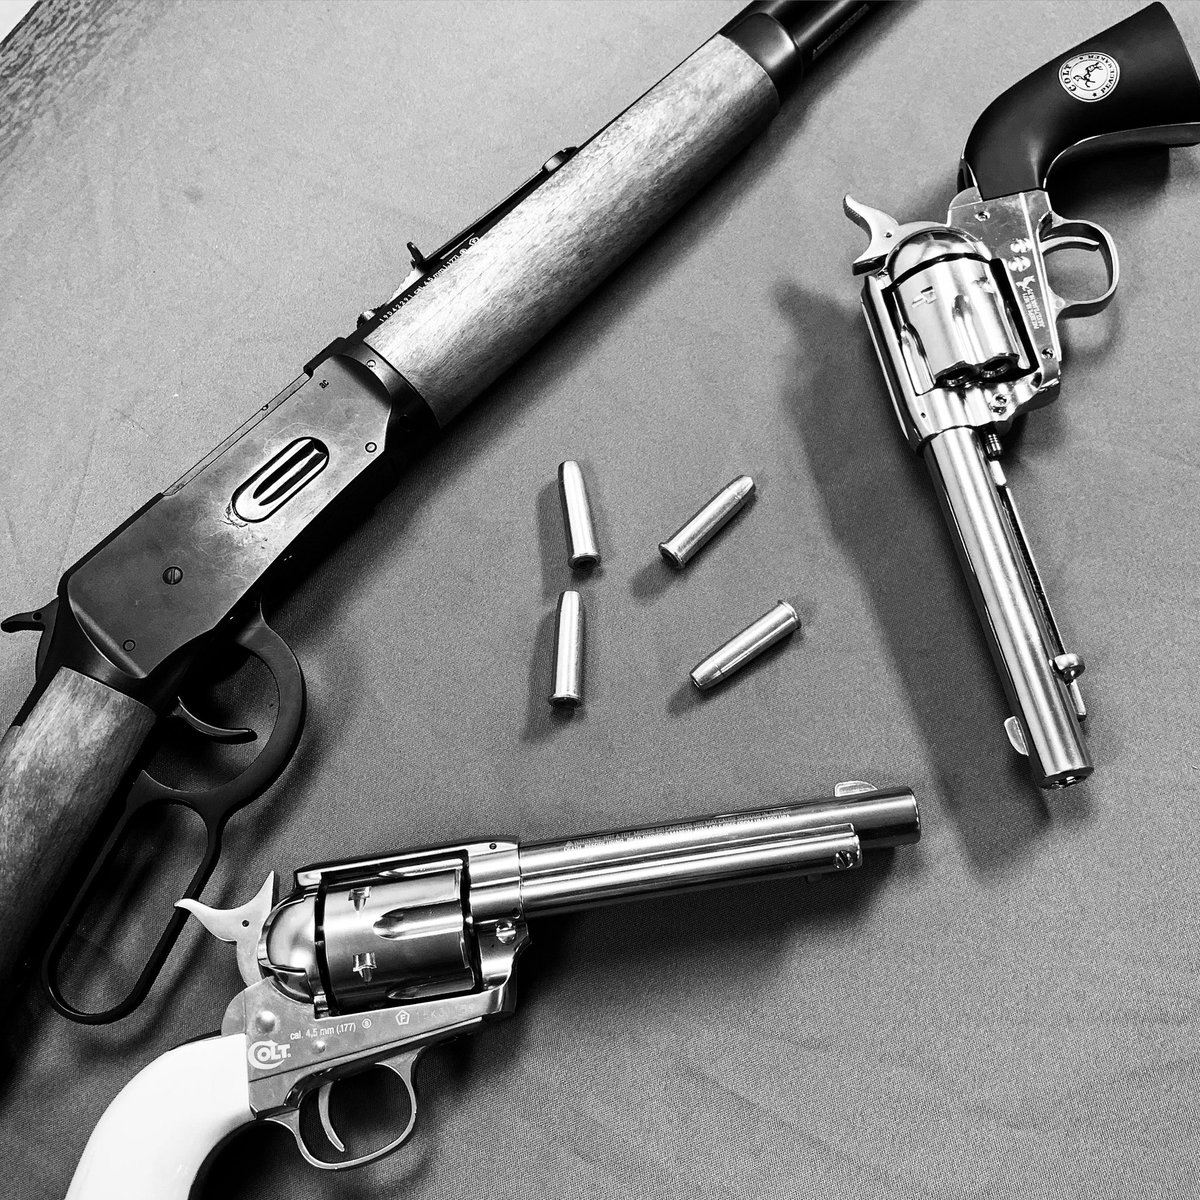 Two Colts and a lever walk into a bar...
The Squatch may be terrible at jokes, but our Colt Peacemakers and Legends Cowboy Rifle aren’t jokes! 
#umarex #umarexusa #umarexairguns #airgun #shootwithair #stageprops #bbgun #coltpeacemaker #coltsaa #saa #reenactment #larping